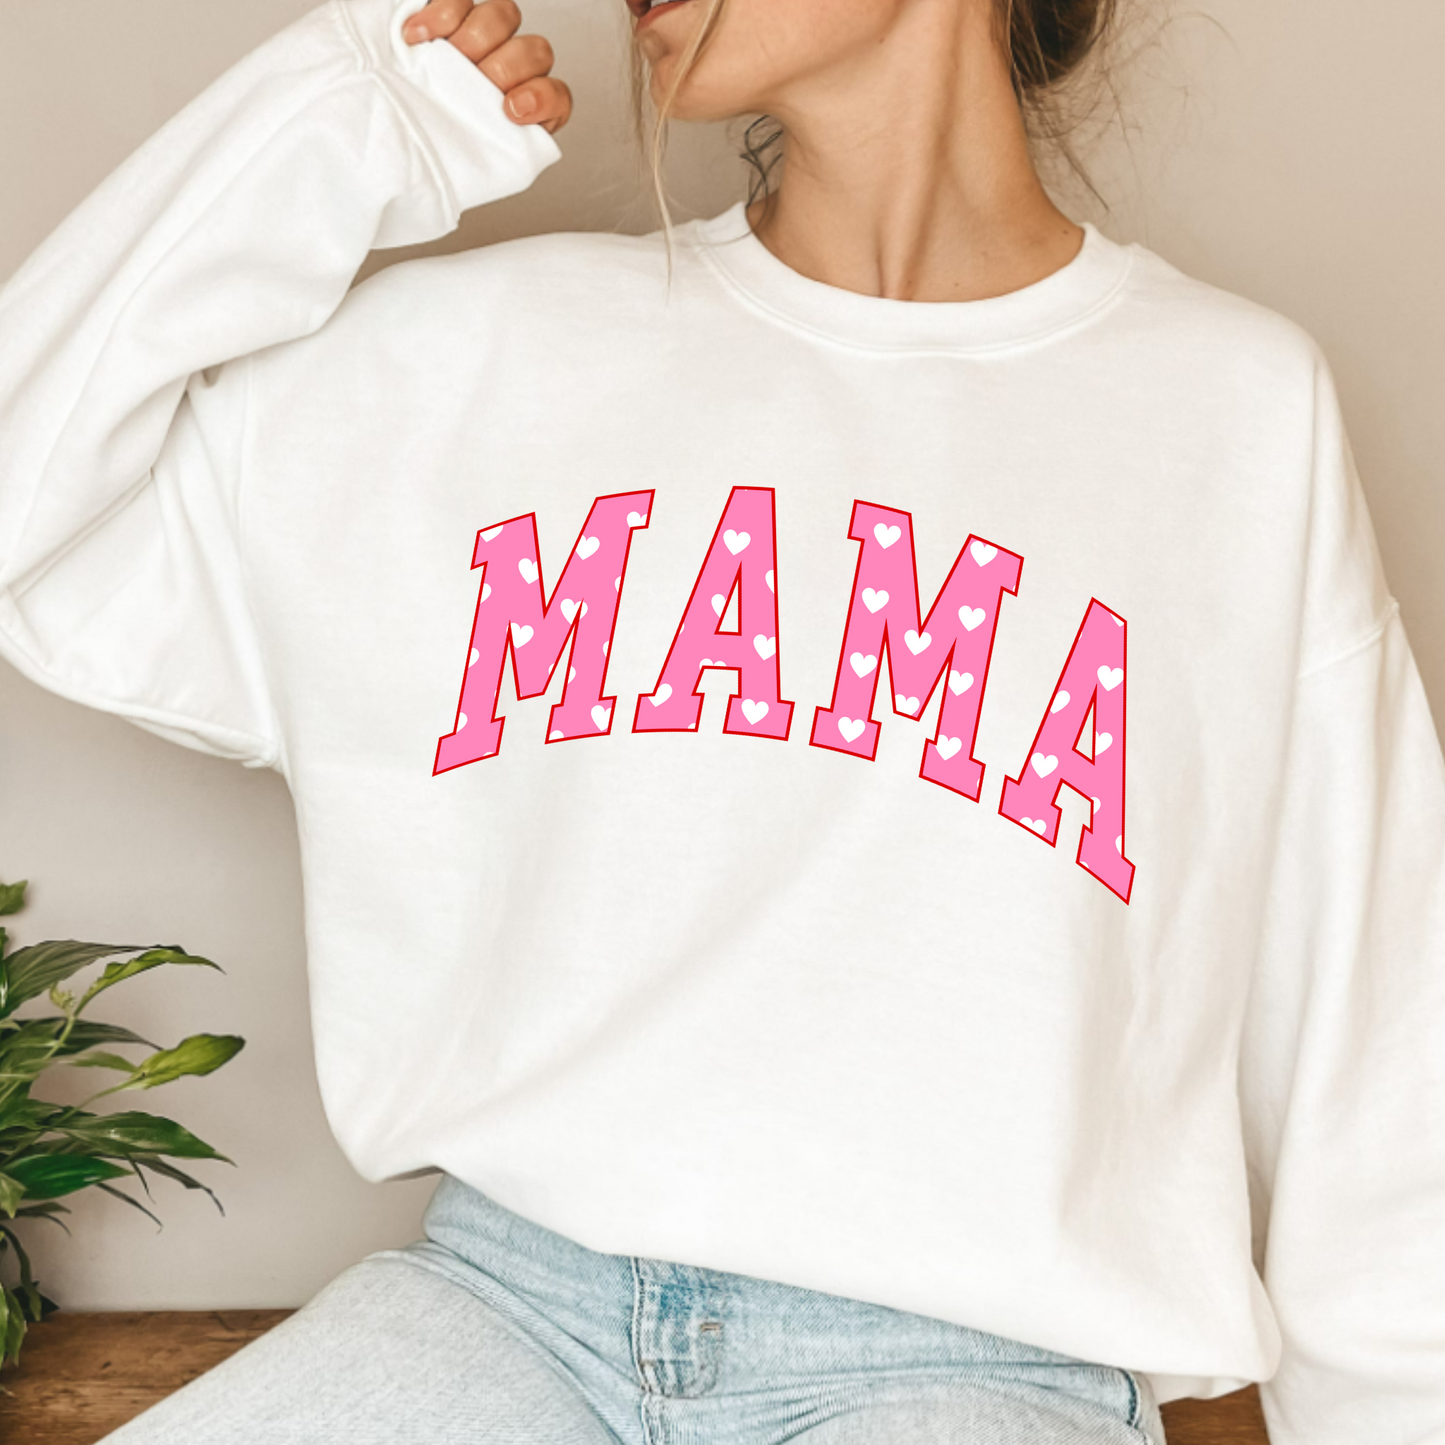 (Shirt Not Included) MAMA in Pink w White Hearts -  Clear Film Transfer